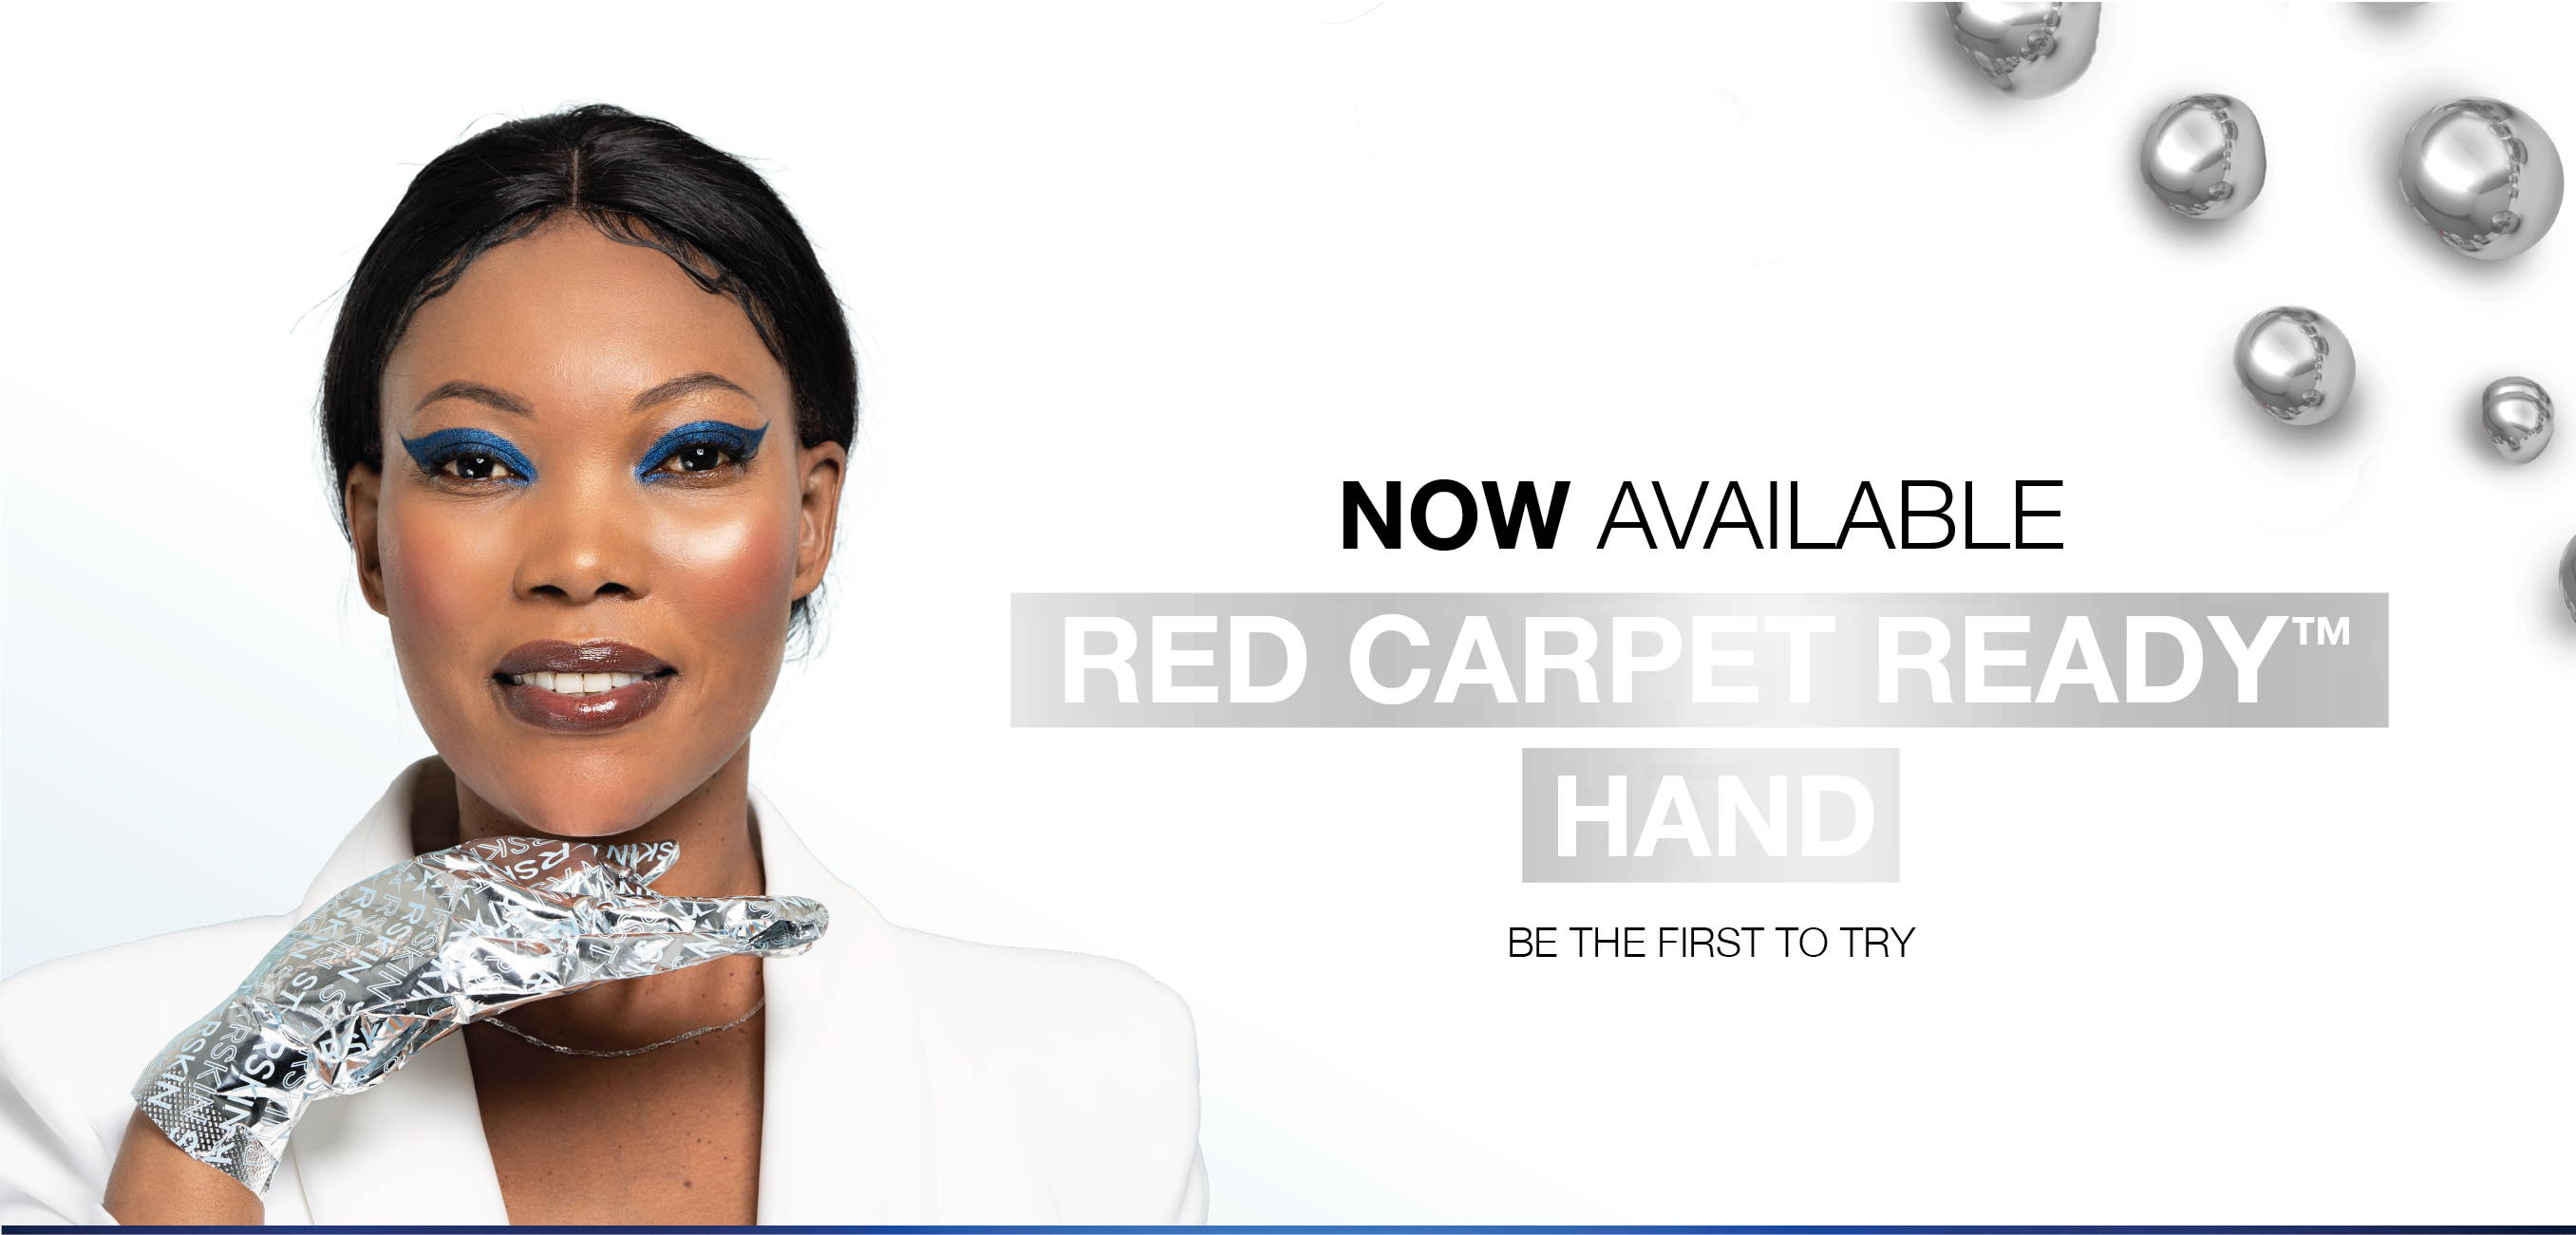 women wearing Red Carpet Ready Hand Mask - title Now available Red Carpet Ready Hand. Be the first to try